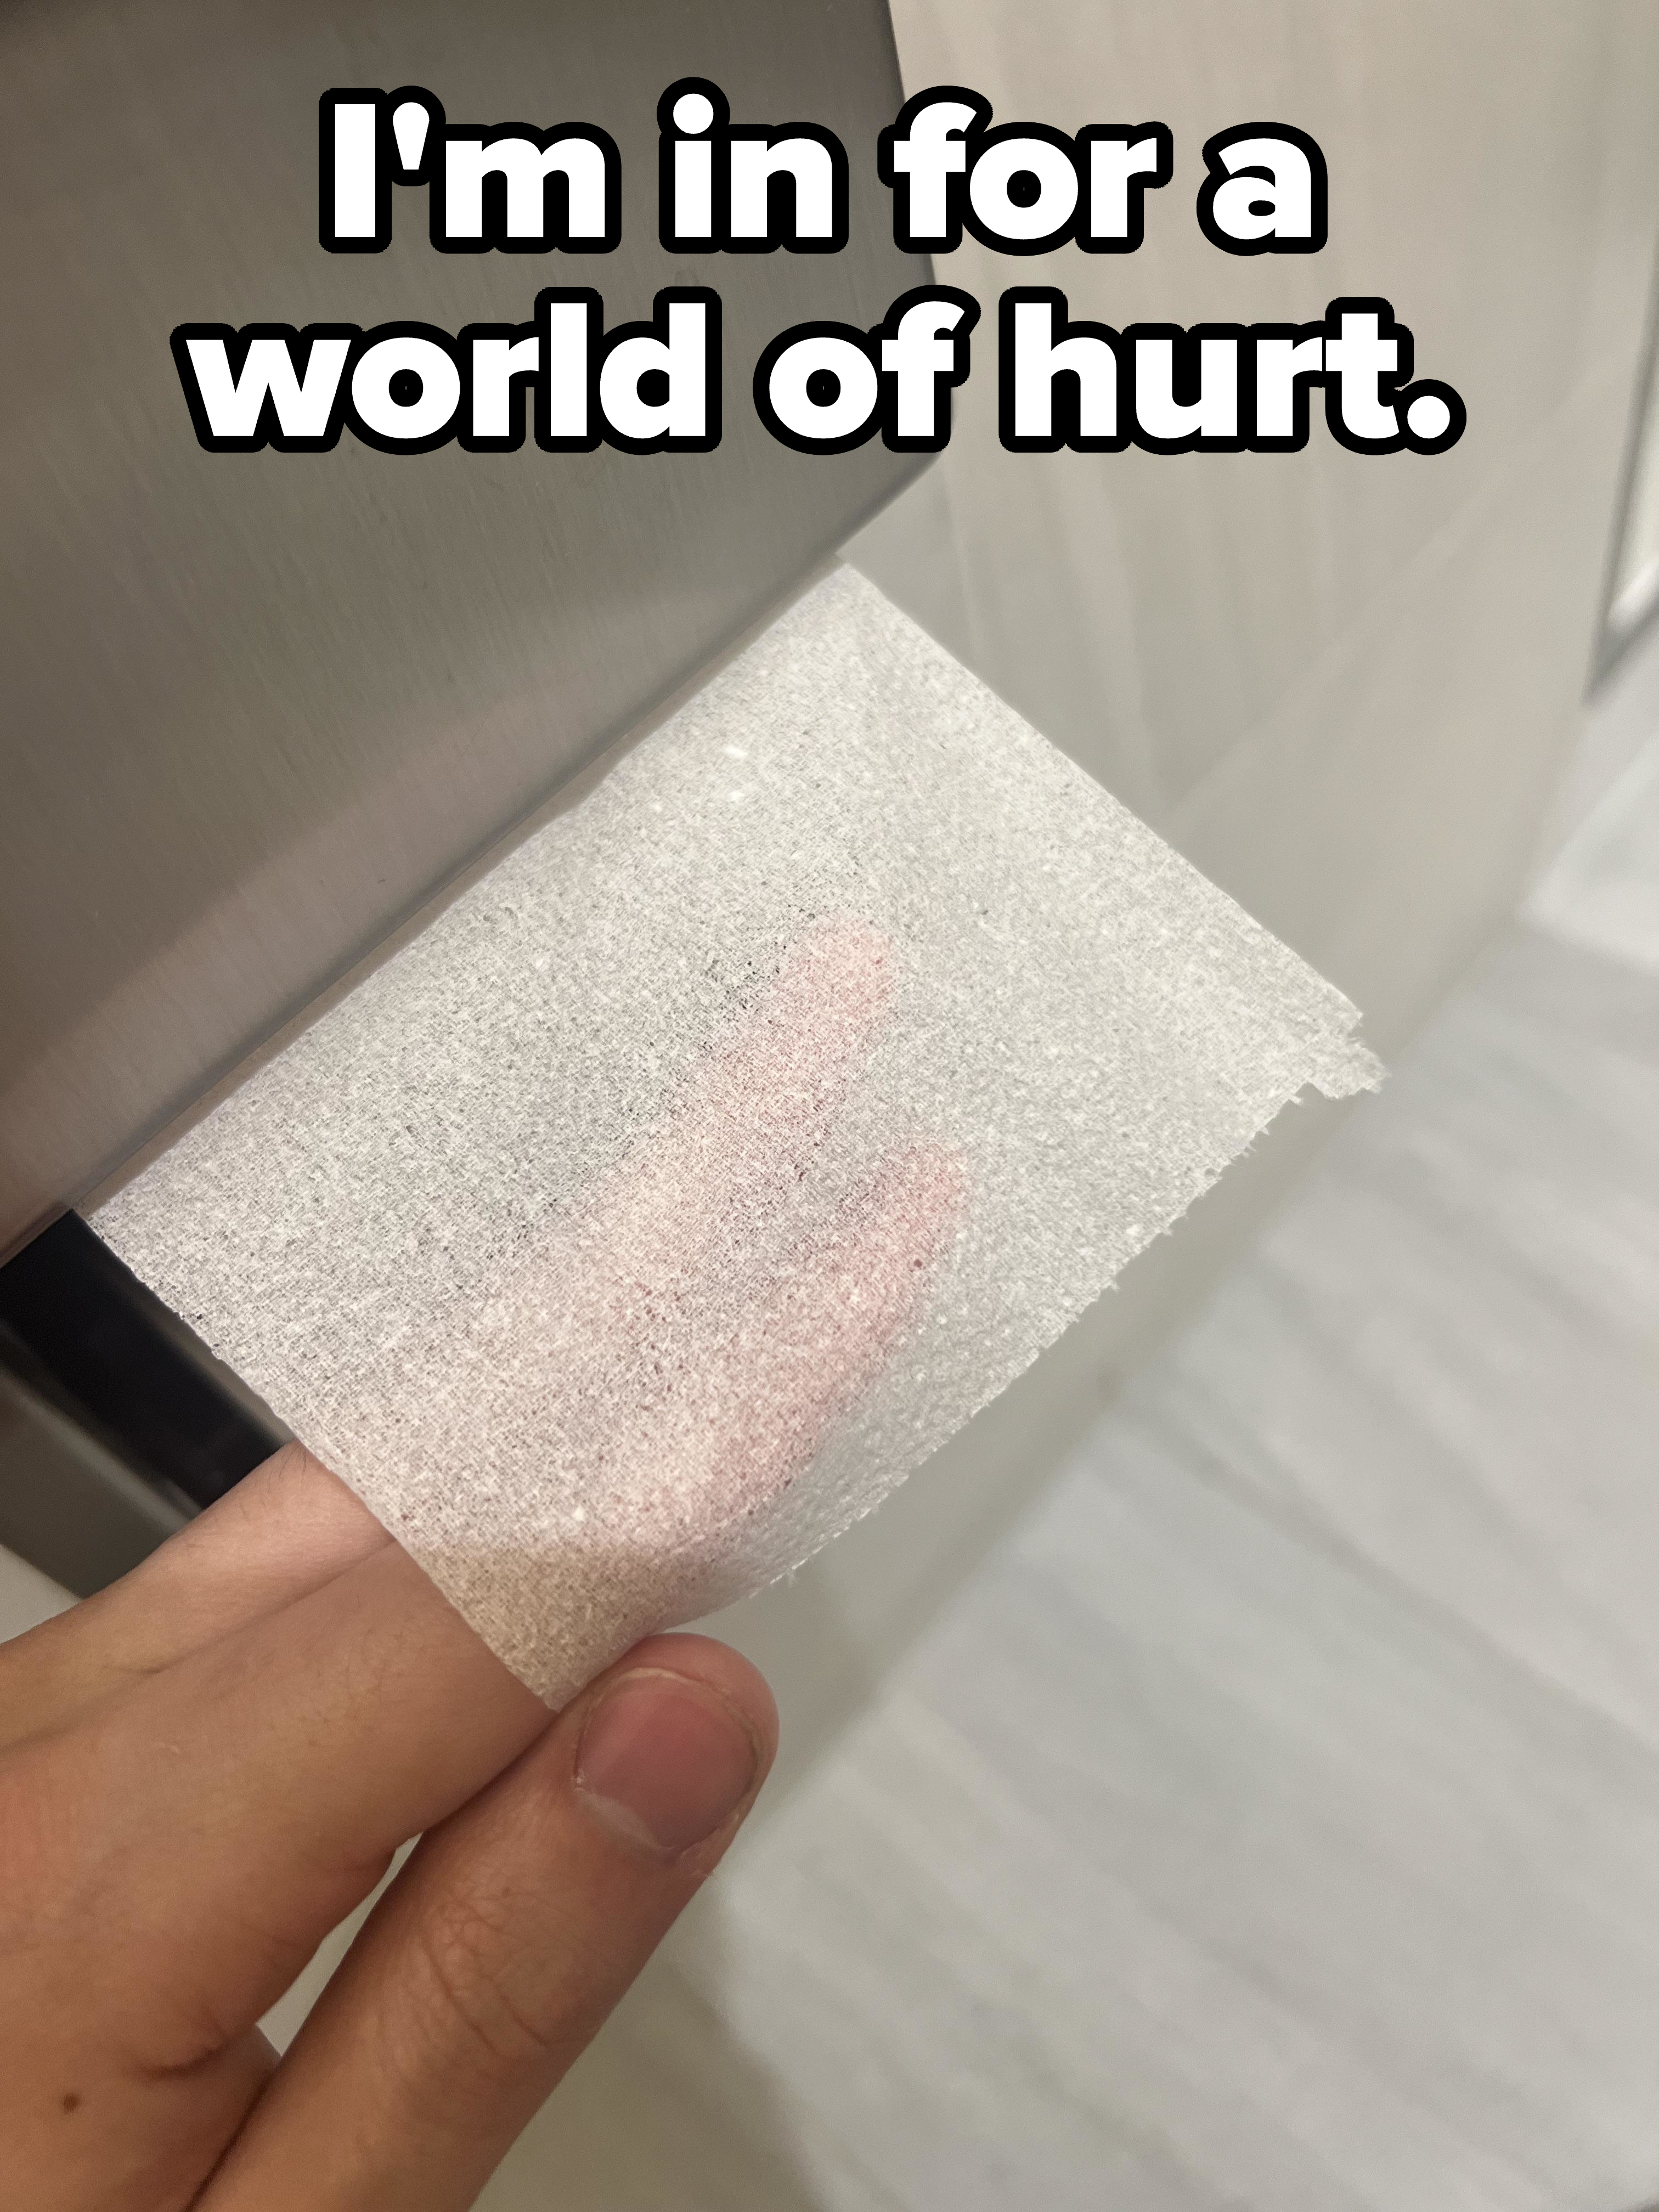 Hand holding a square of very thin toilet paper with the fingers of the hand holding it visible through it